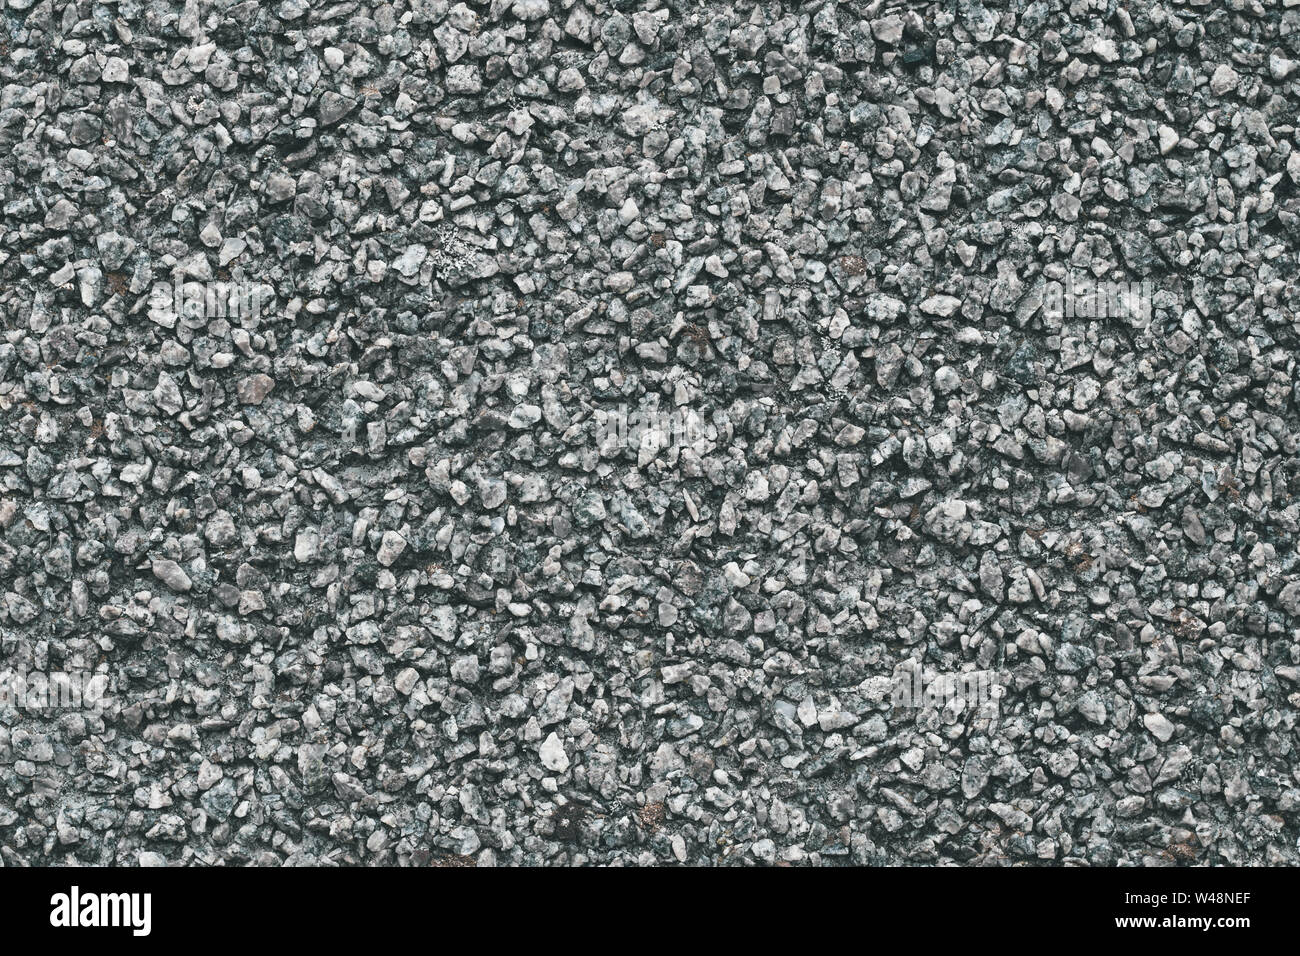 Grey stone background. Abstract pattern of gravel. Natural road texture. Rock material. Grunge floor on street. Stock Photo